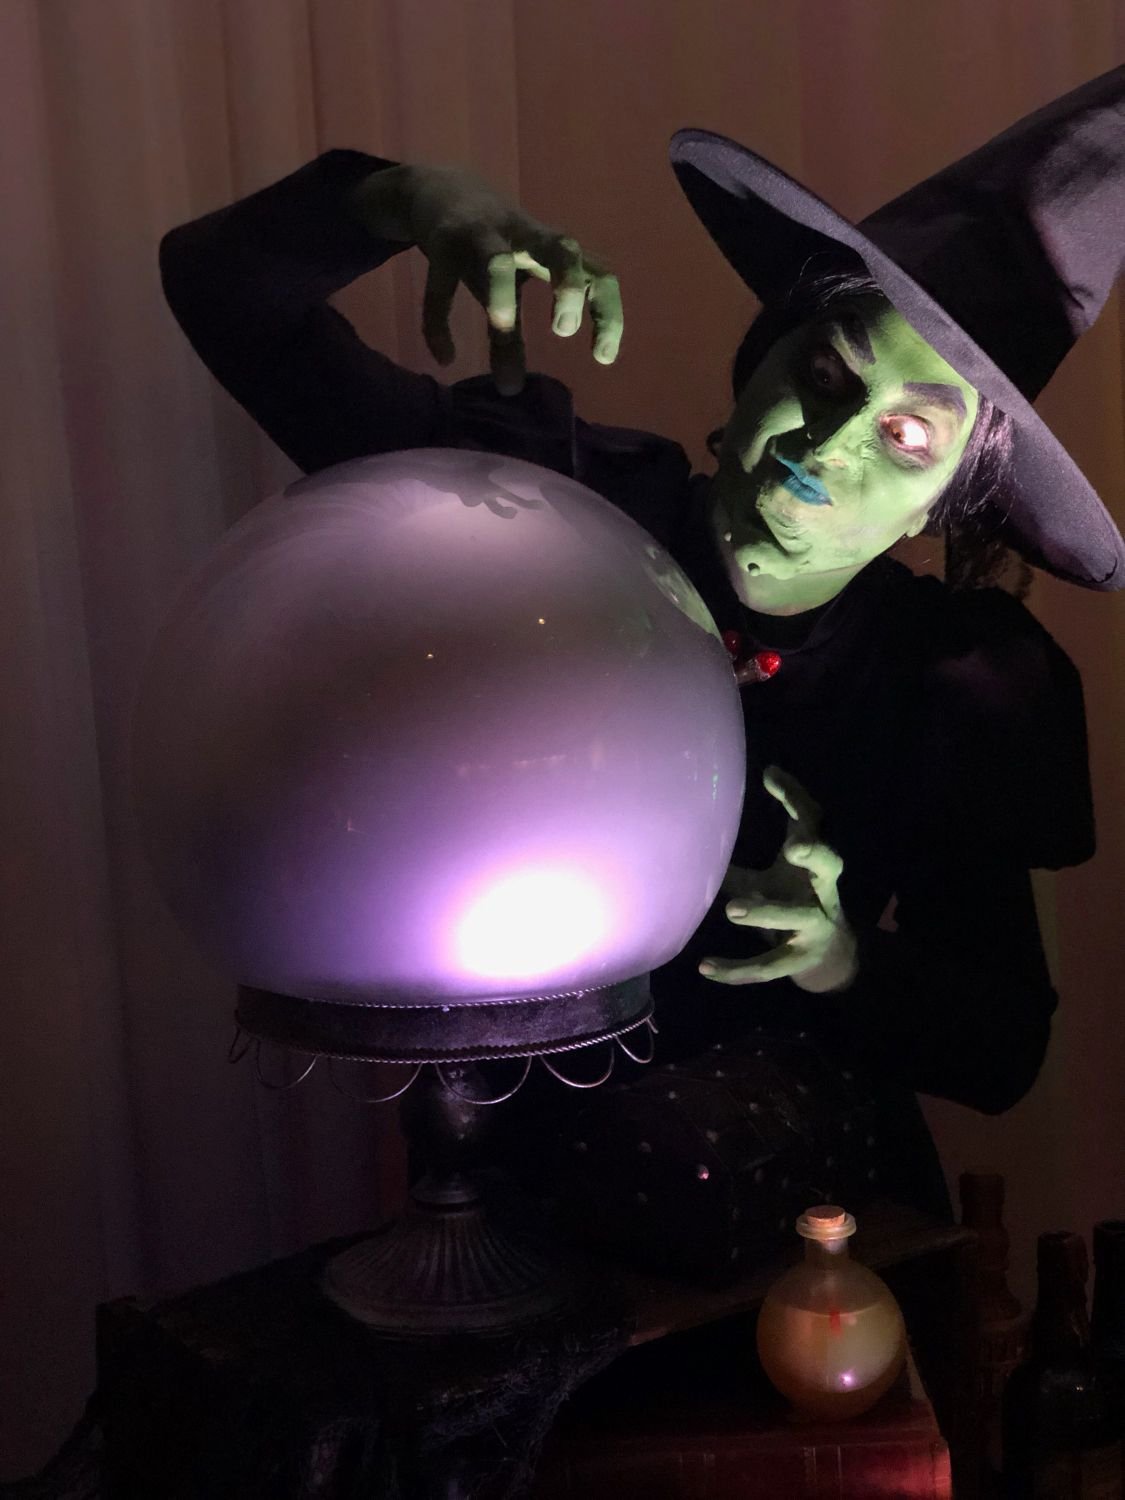 Wicked Witch Casting Spells on You!